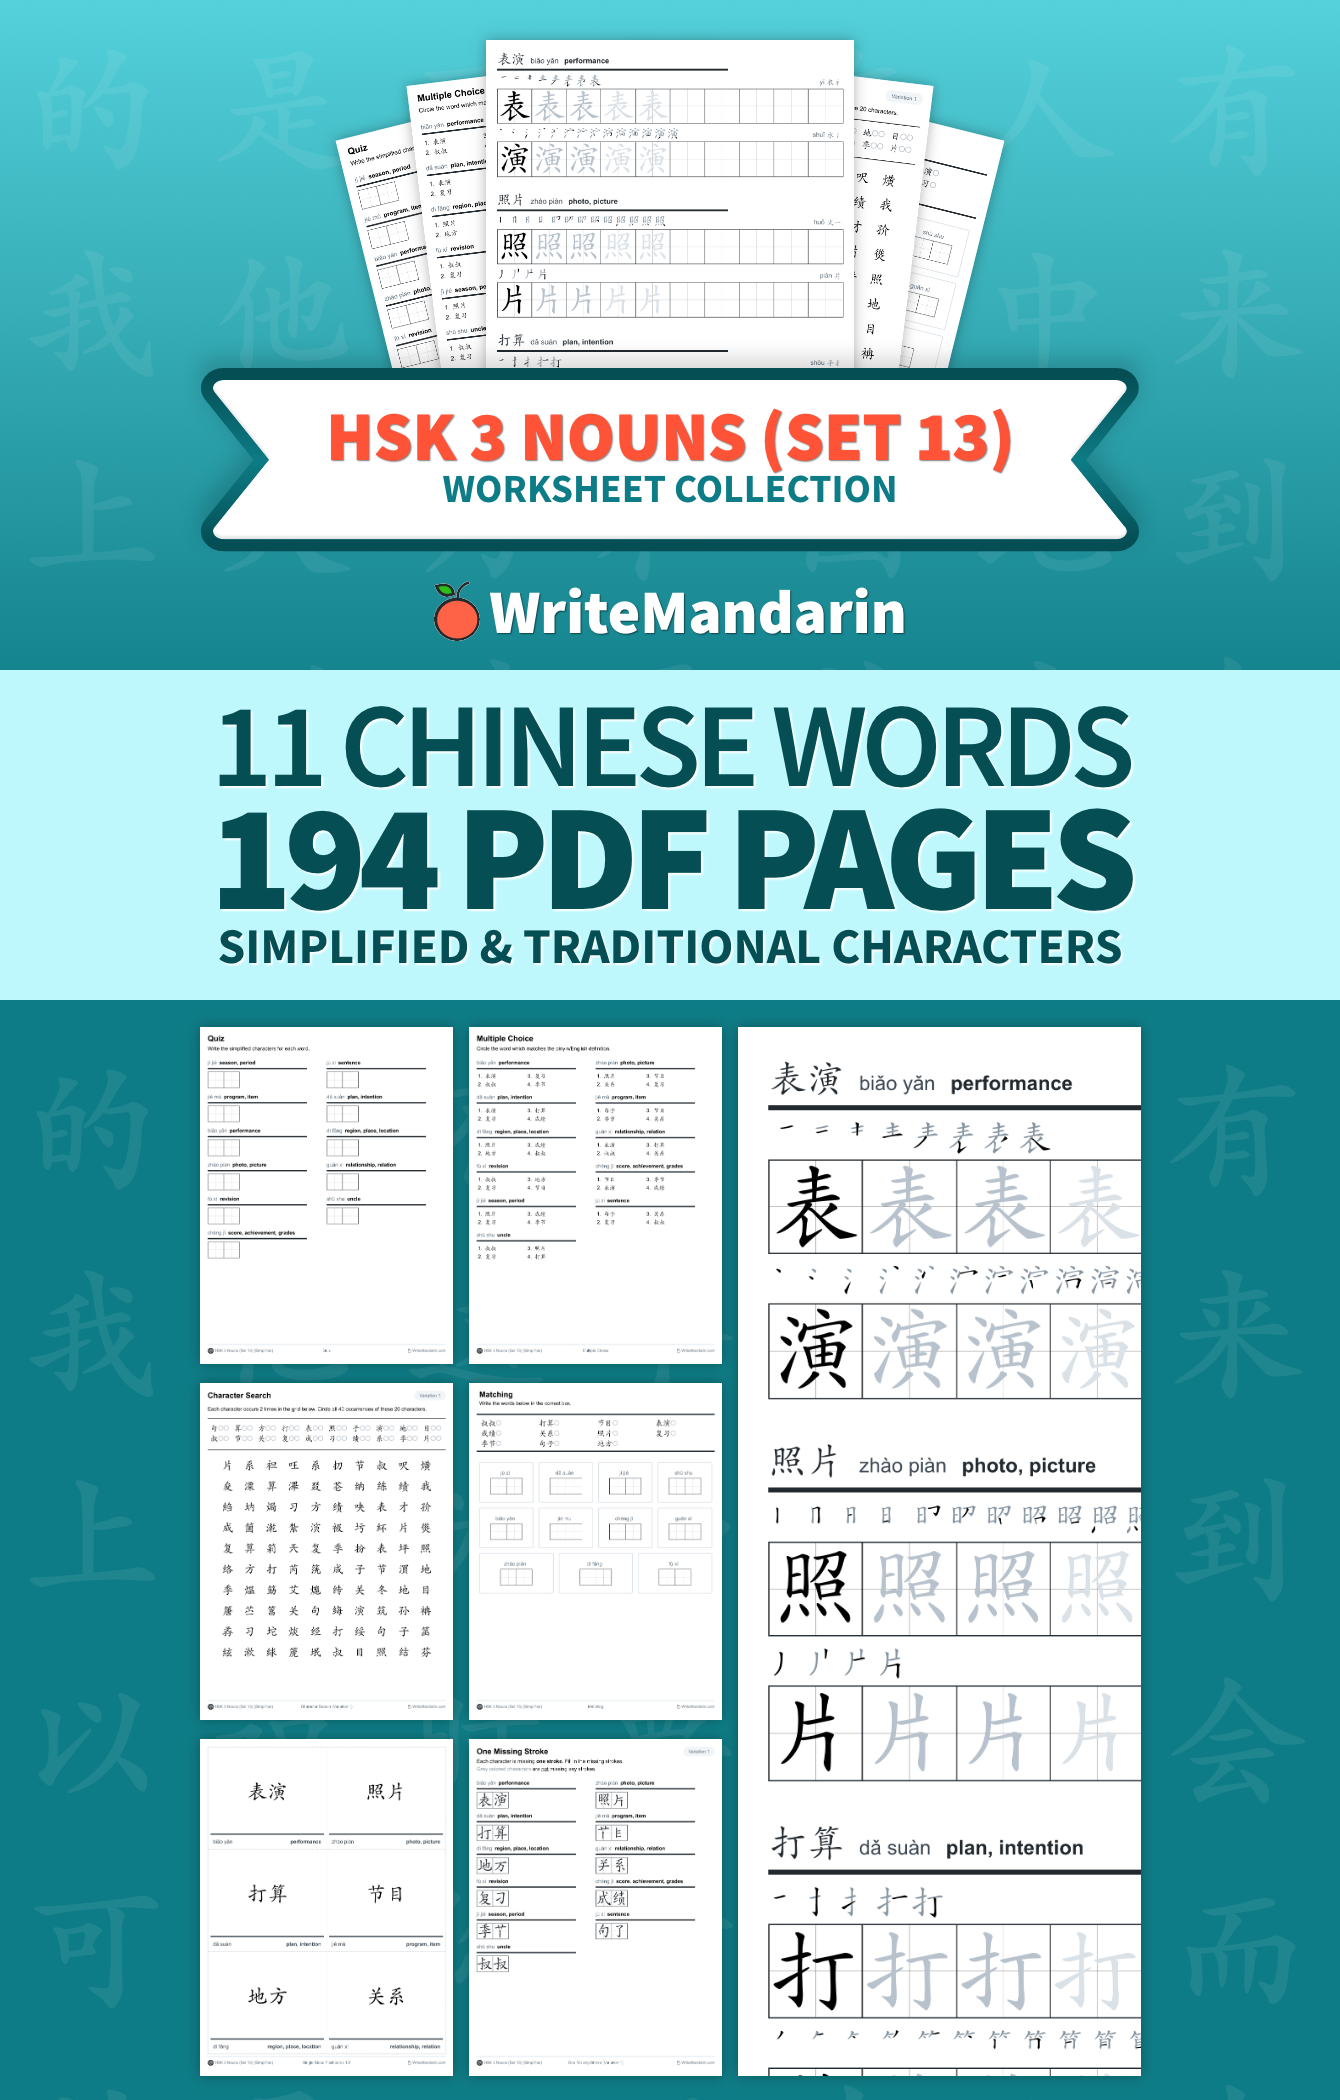 Preview image of HSK 3 Nouns (Set 13) worksheet collection